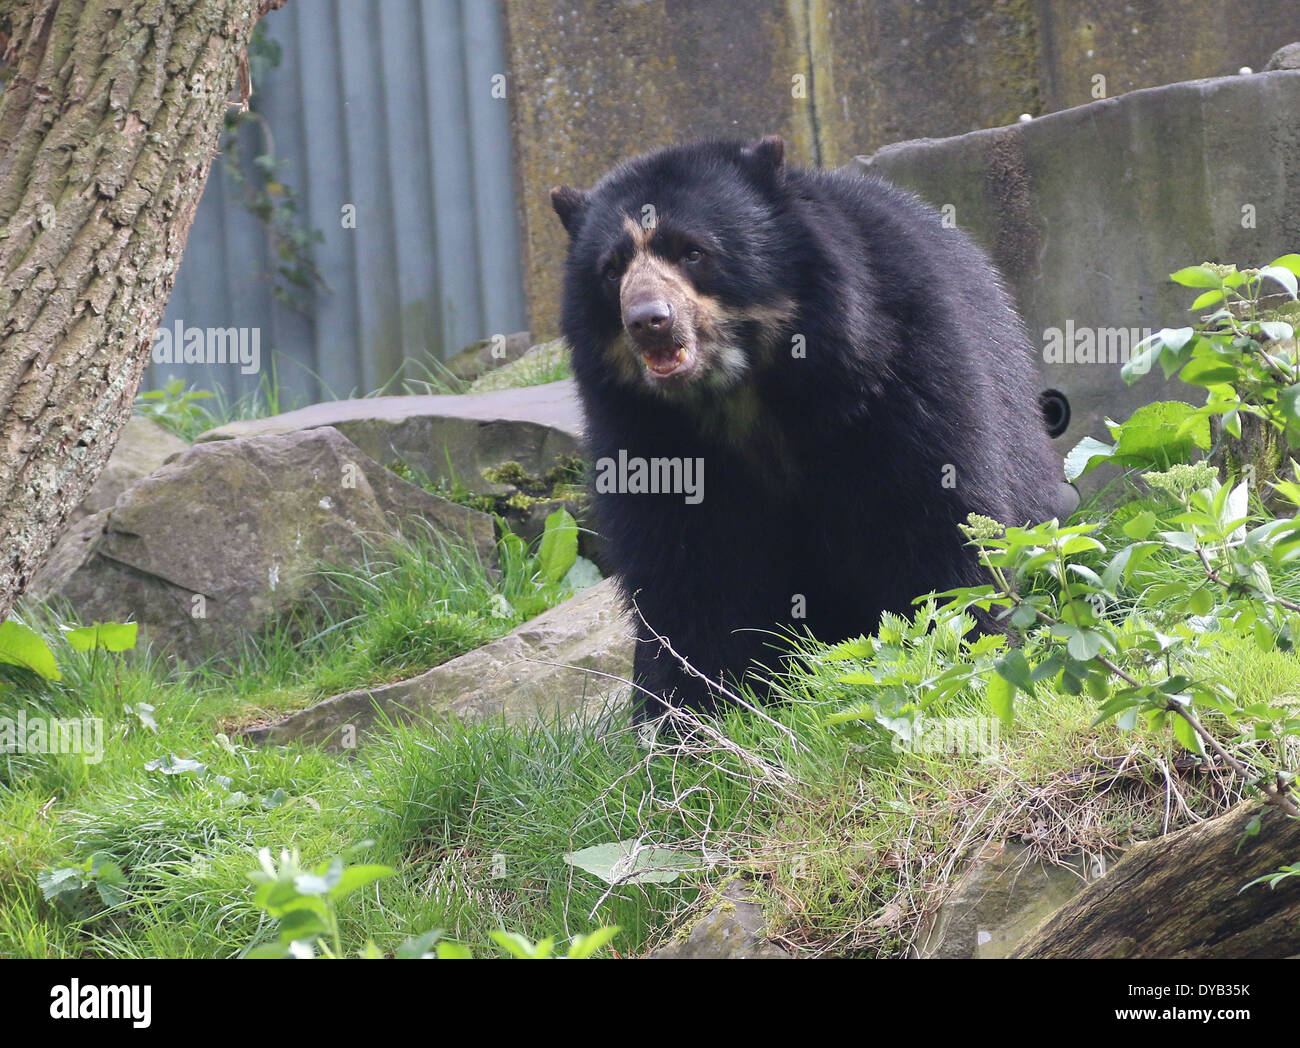 Spectacled or  Andean bear (Tremarctos ornatus) at Emmen Zoo, The Netherlands Stock Photo